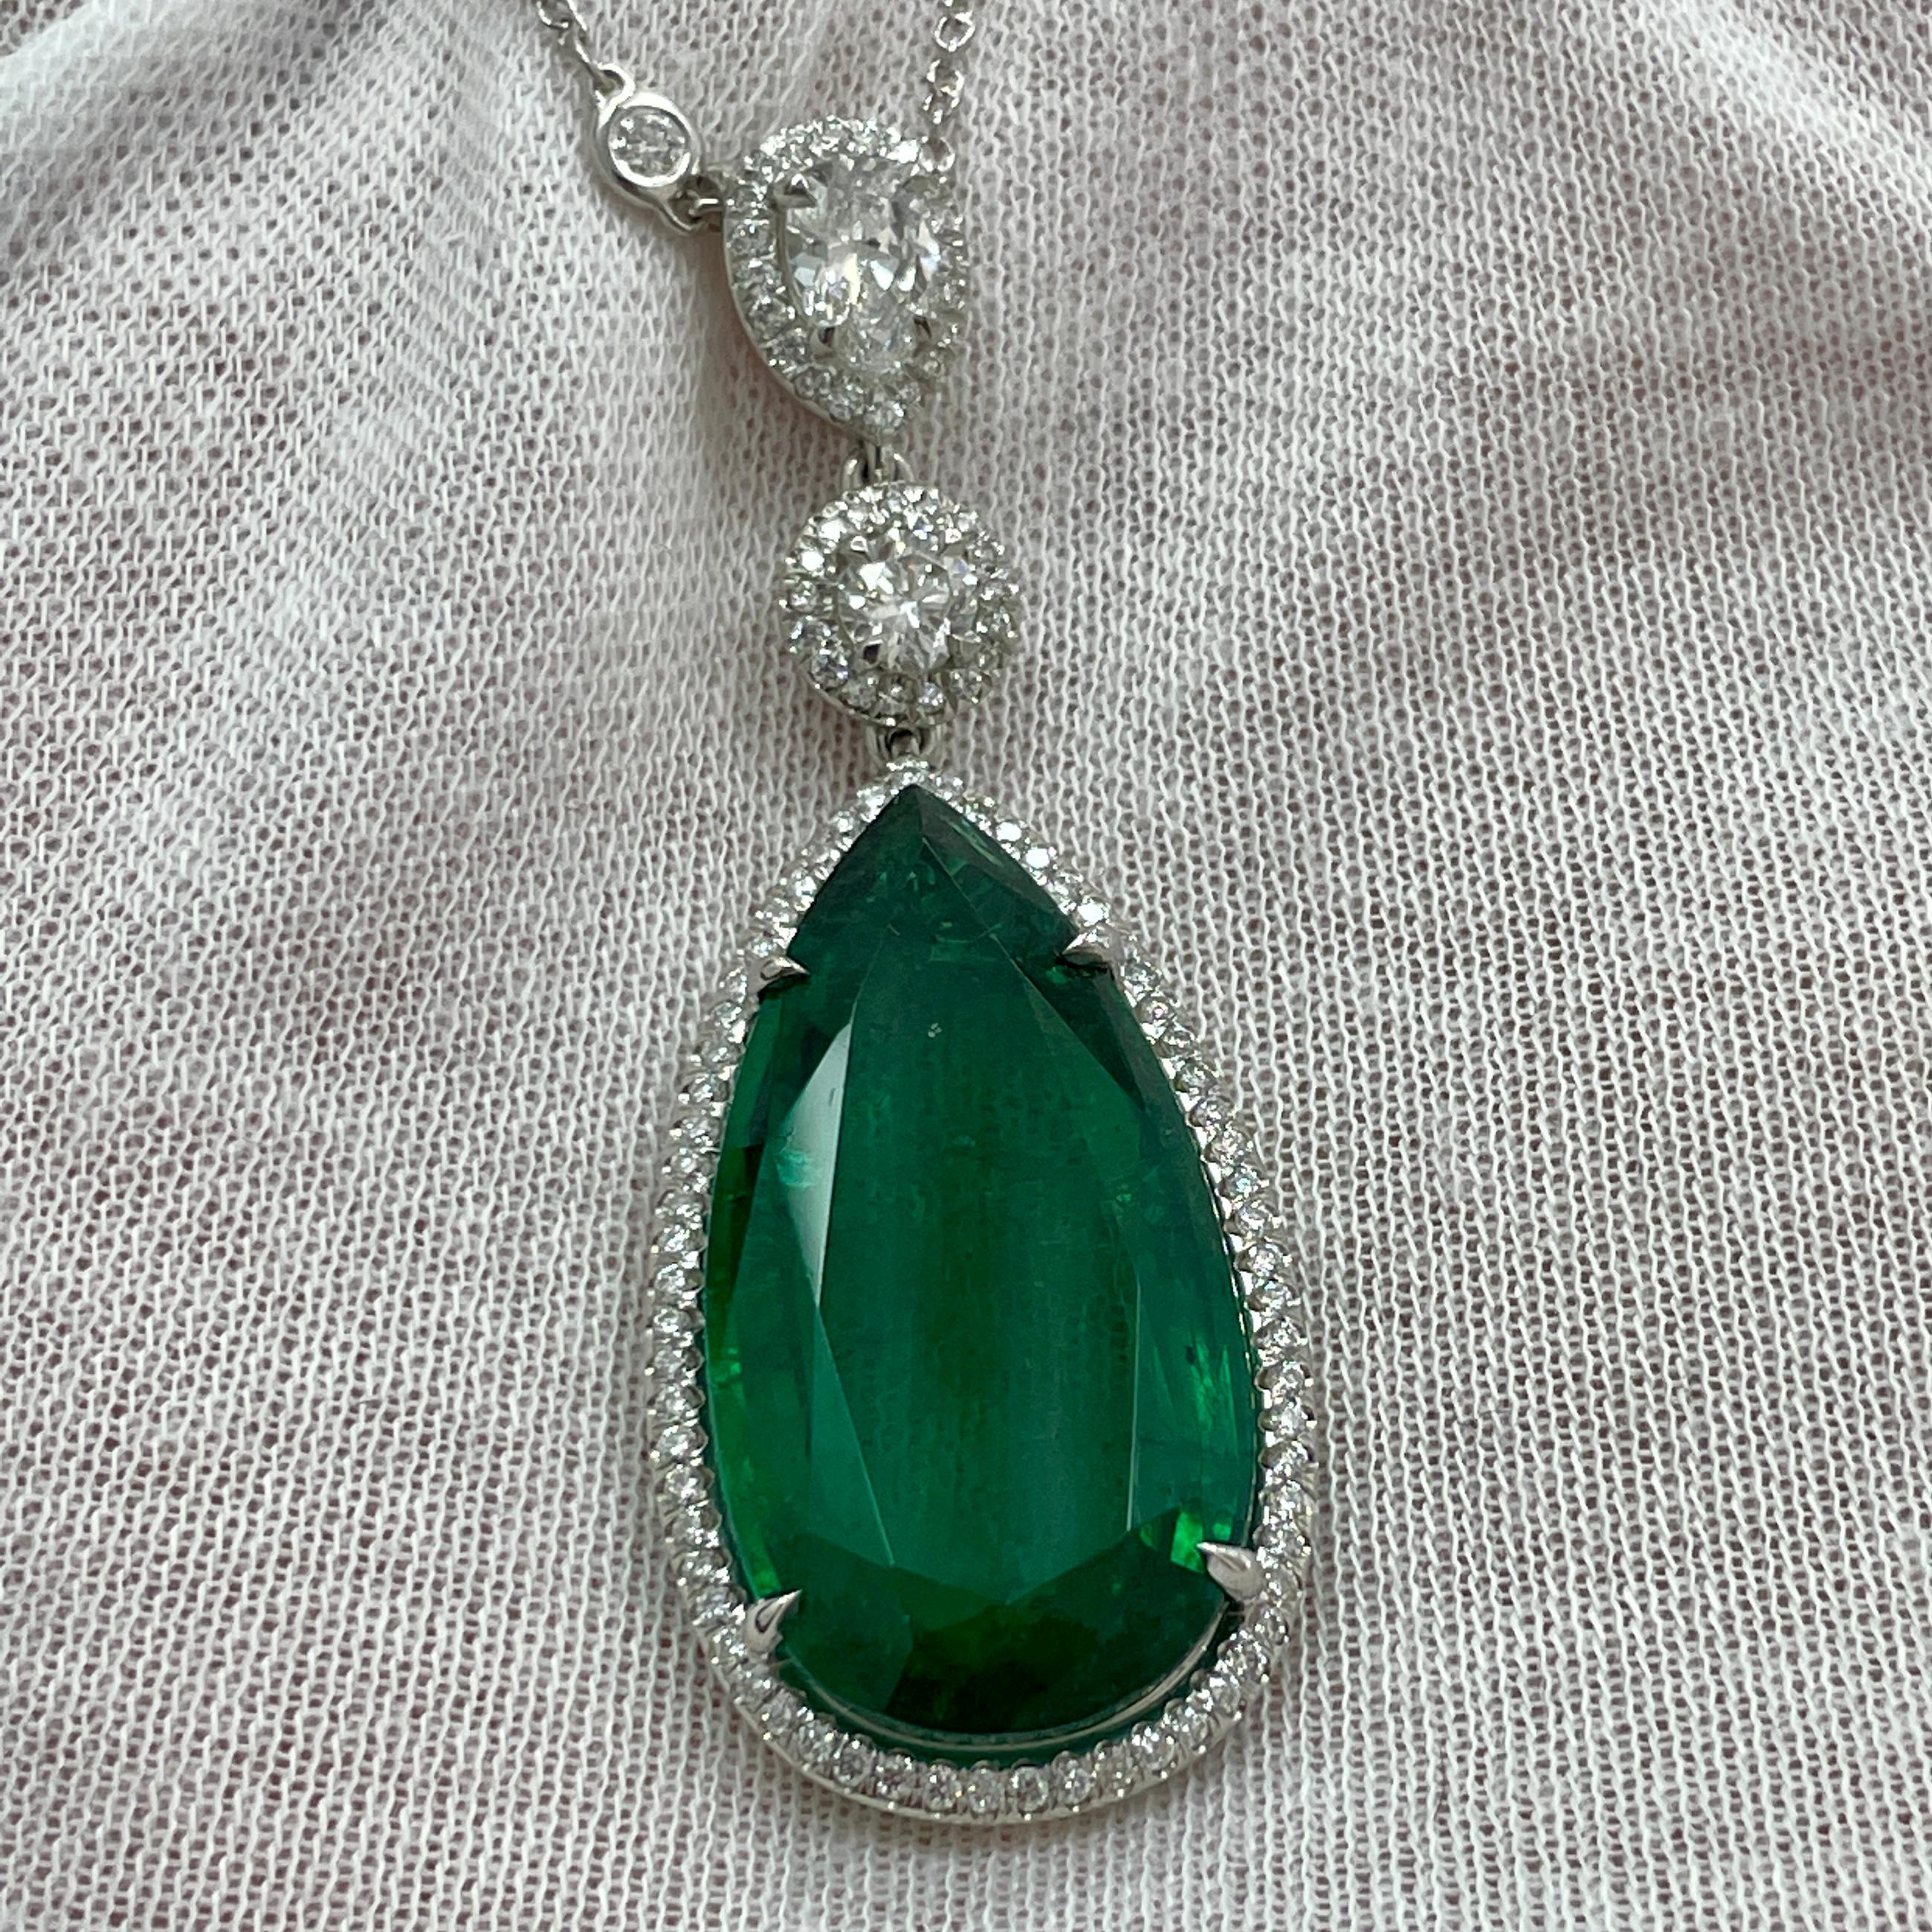 A simple yet elegant pear shape emerald in a platinum pendant with brilliant GH VS white diamonds on a 14k white gold diamonds by the yard chain